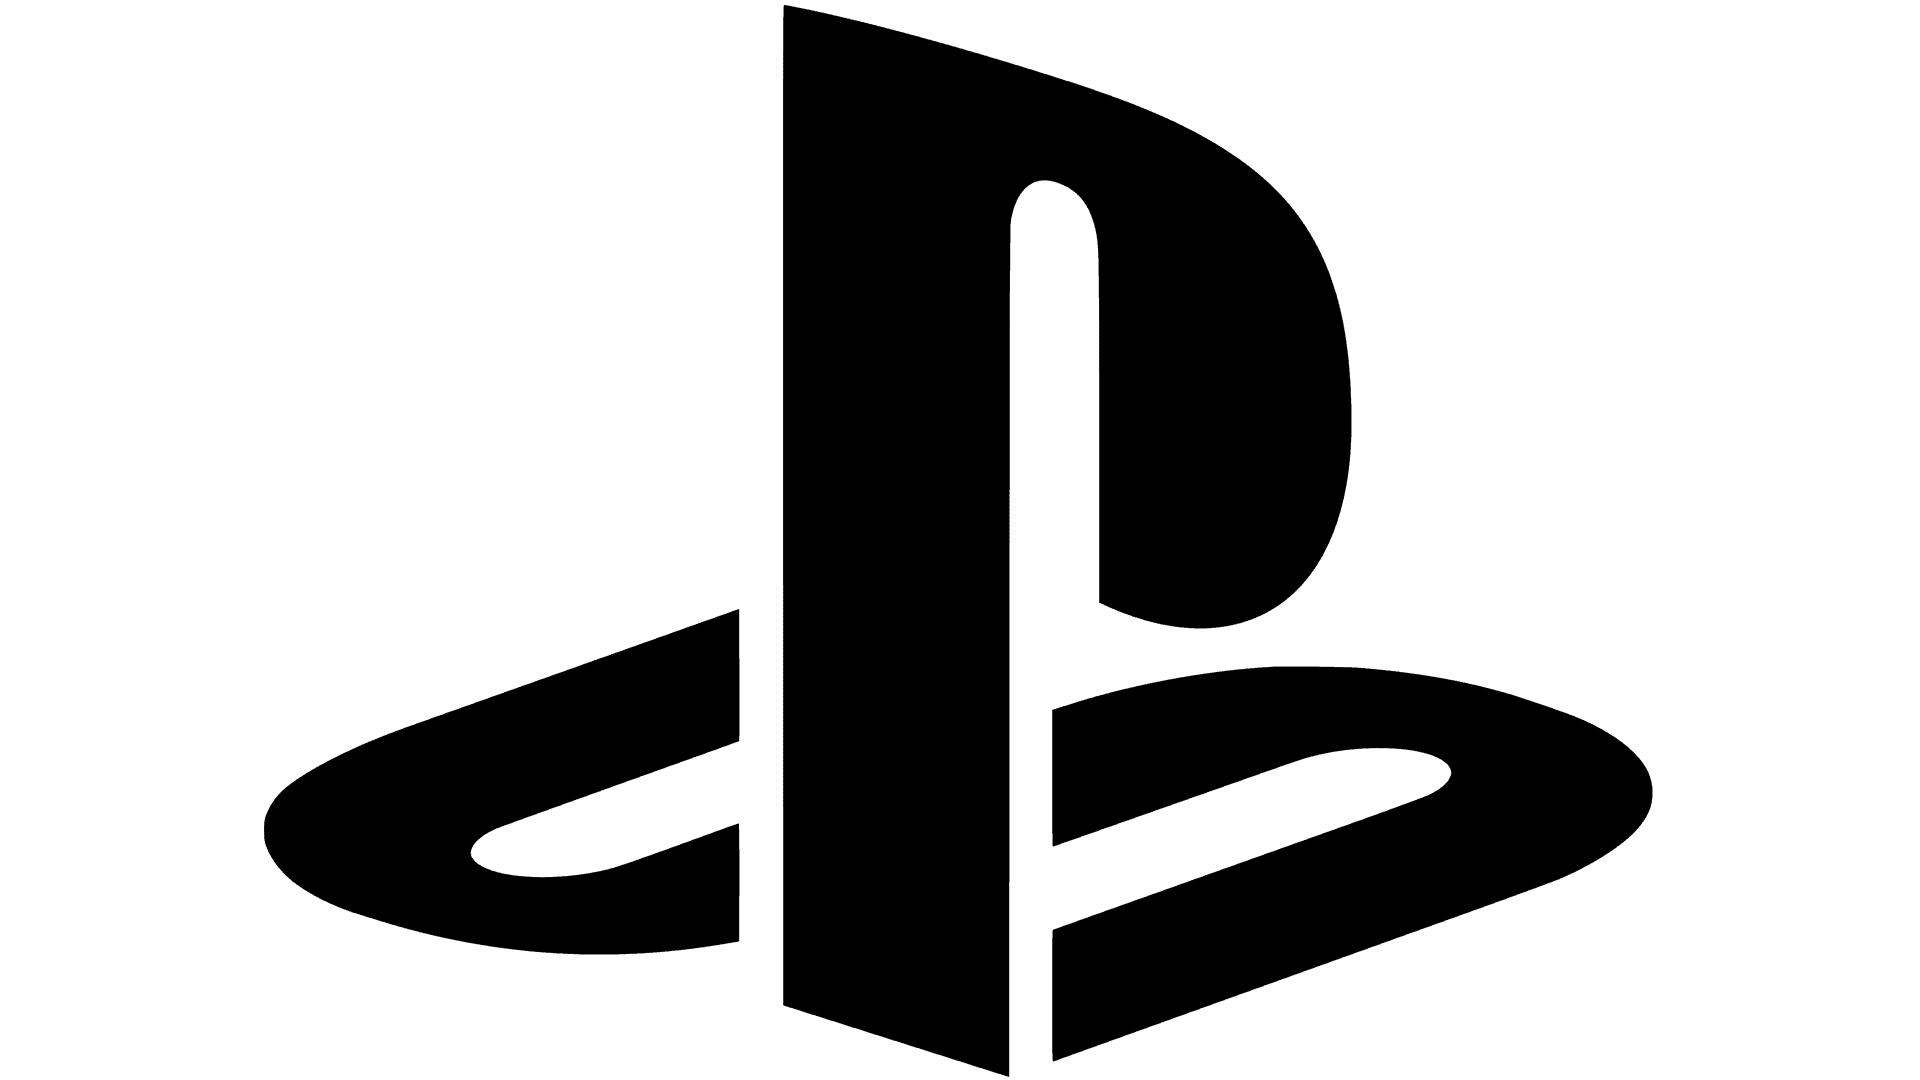 The Playstation Logo Is Shown On A Green Background